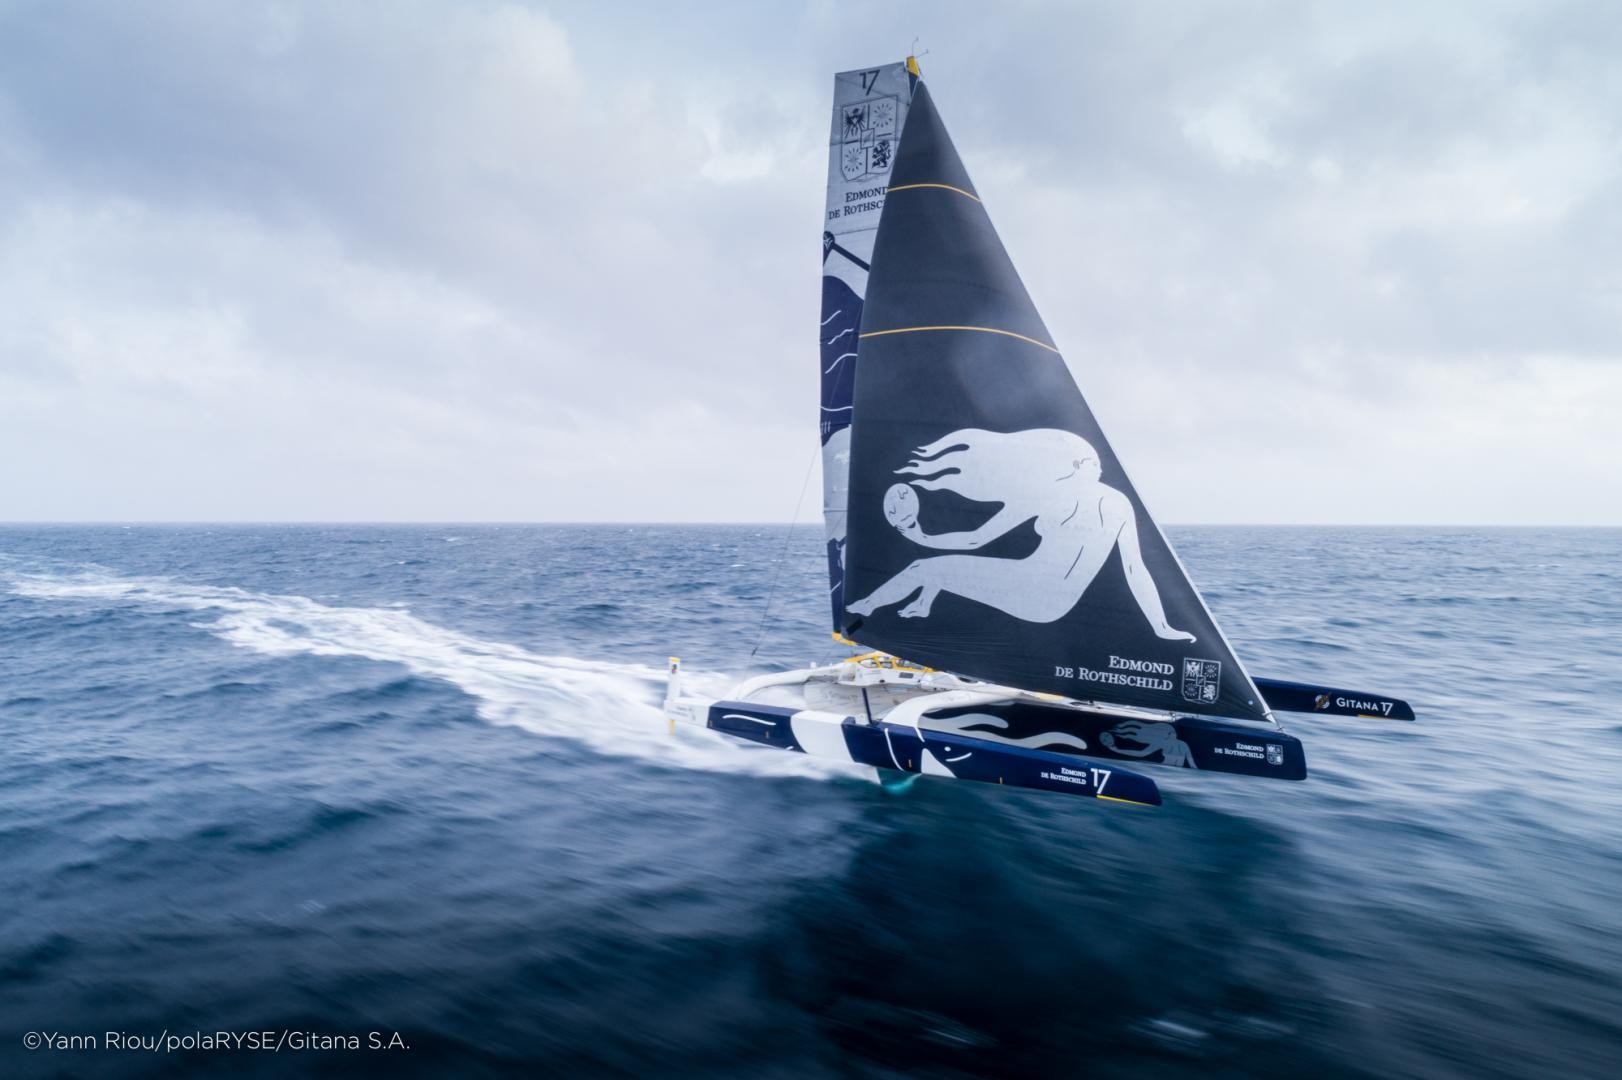 Maxi Edmond de Rothschild secures victory and the record